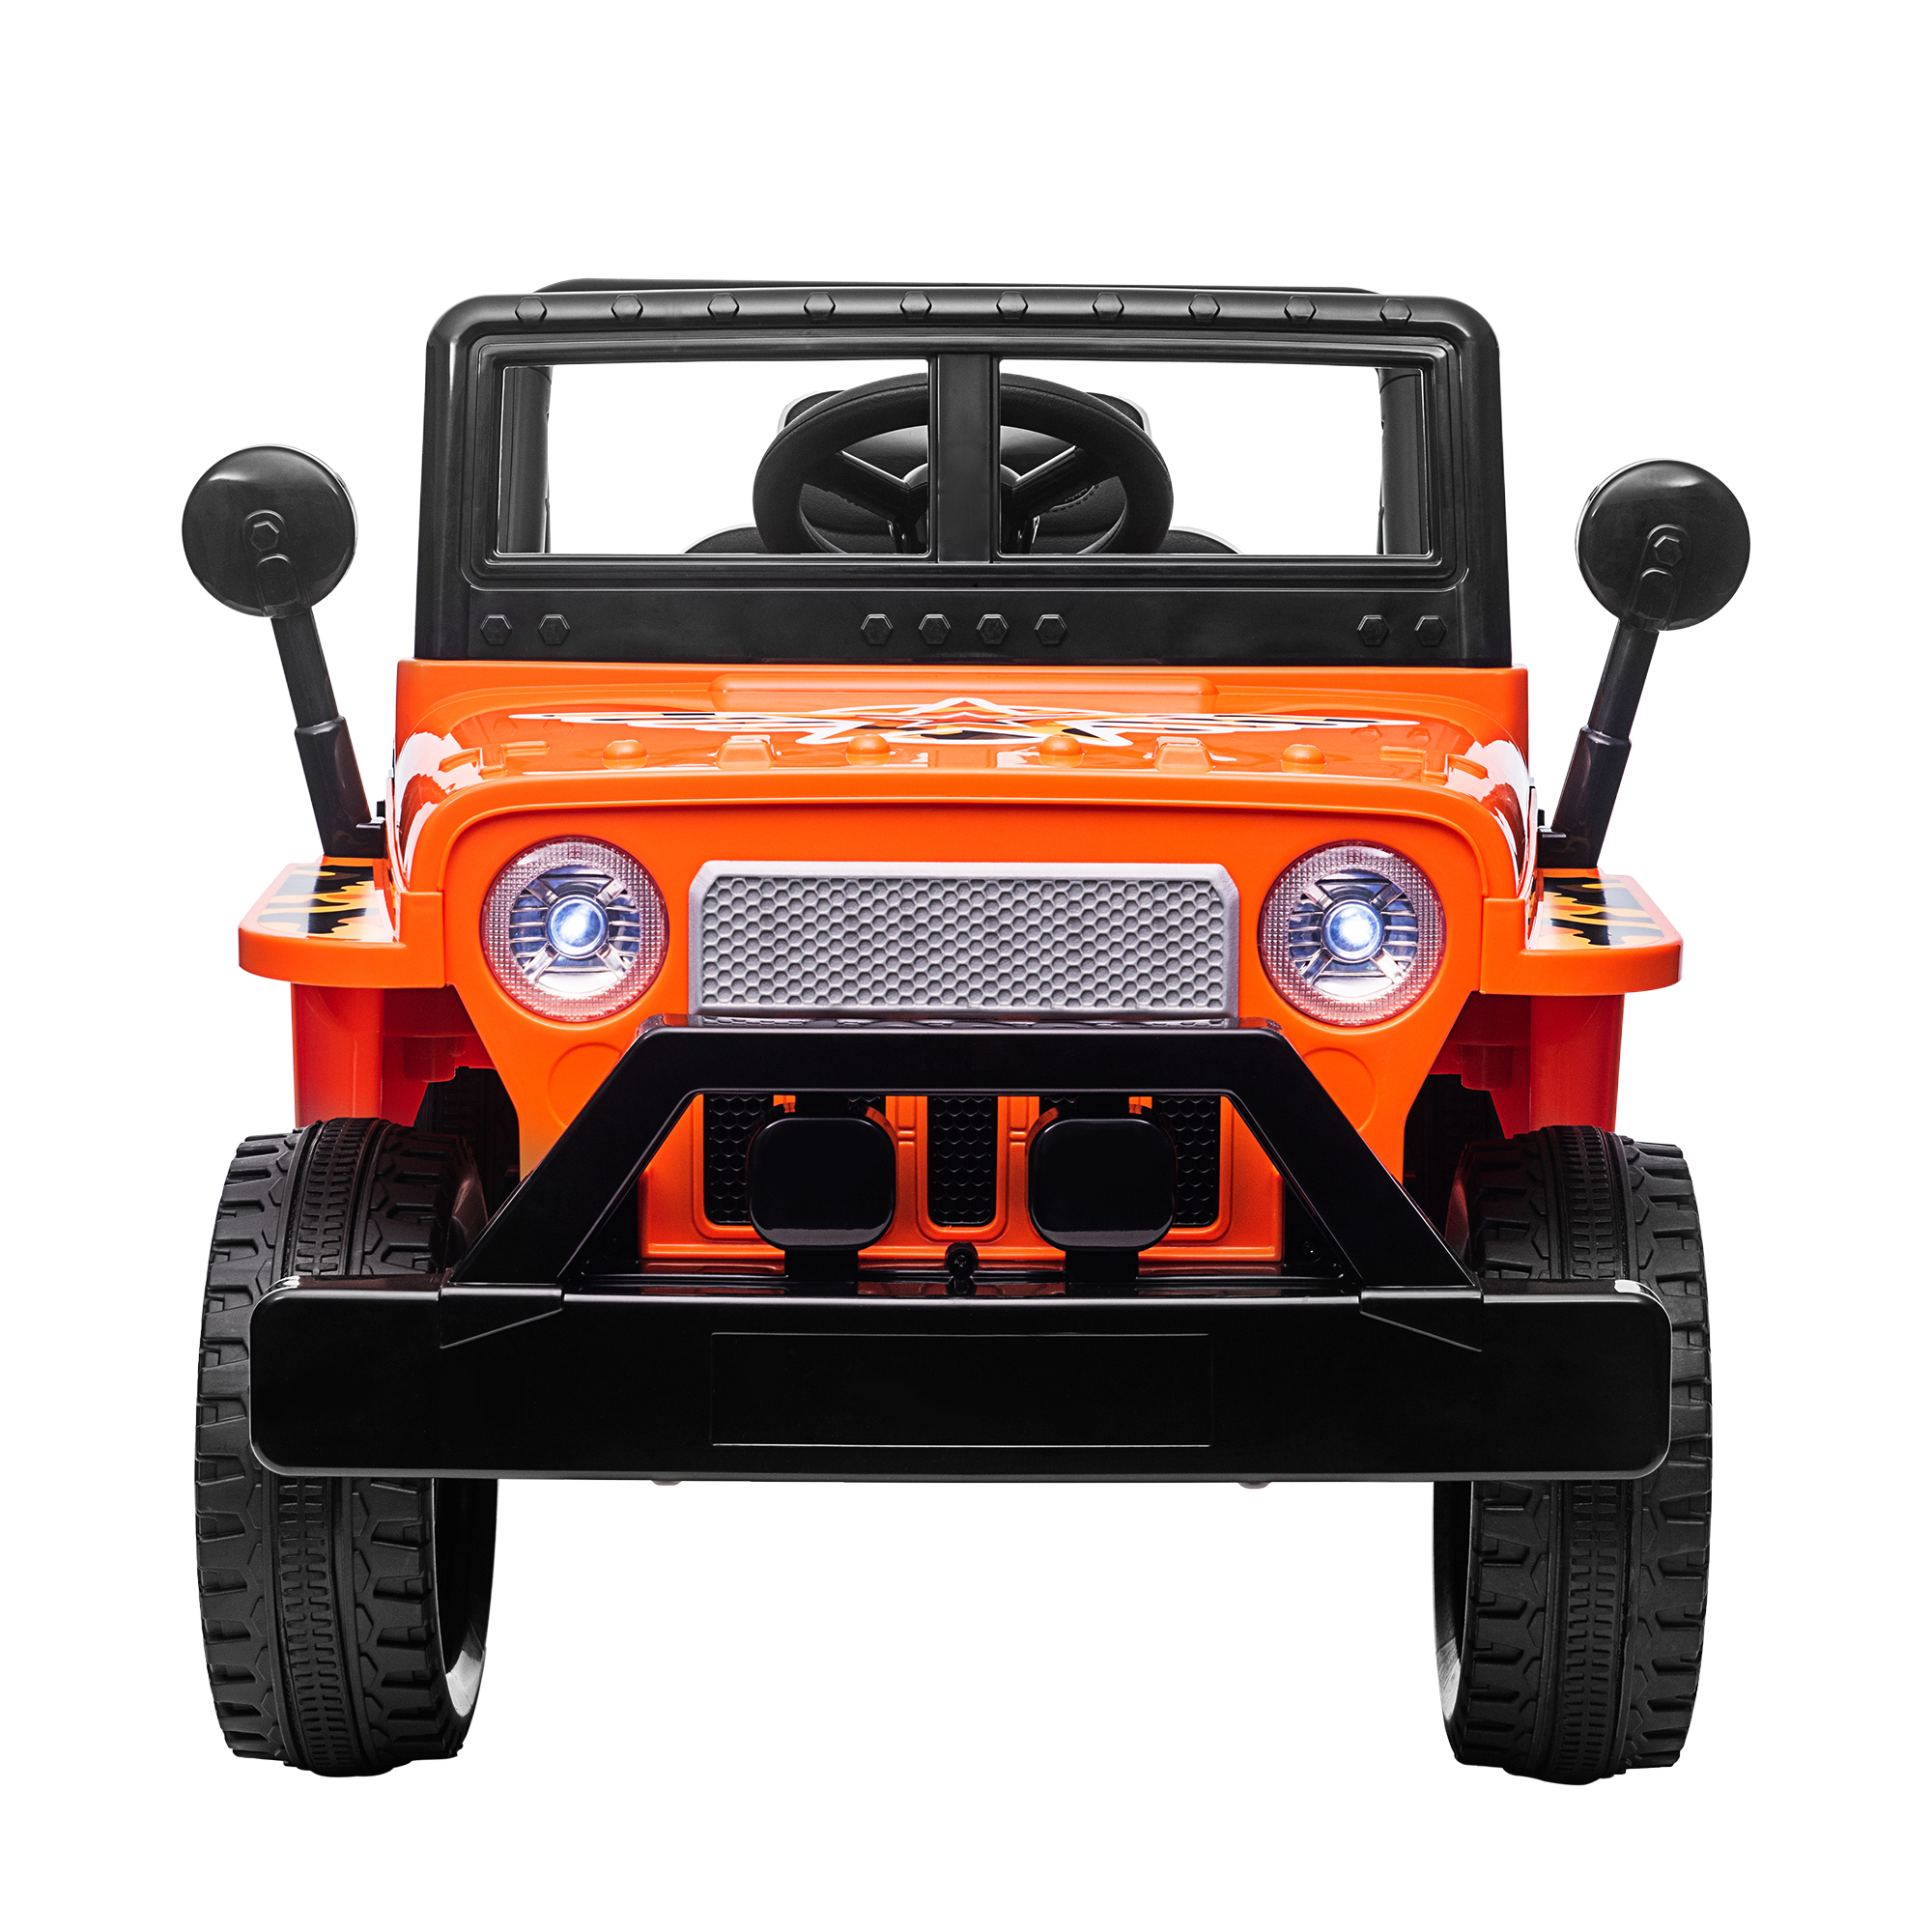 Customized 12V Kids Ride On Truck Car, Power Wheels with LED Lights Horn Openable Doors, Electric Vehicle Toy for 3-6 Ages, Orange-CASAINC